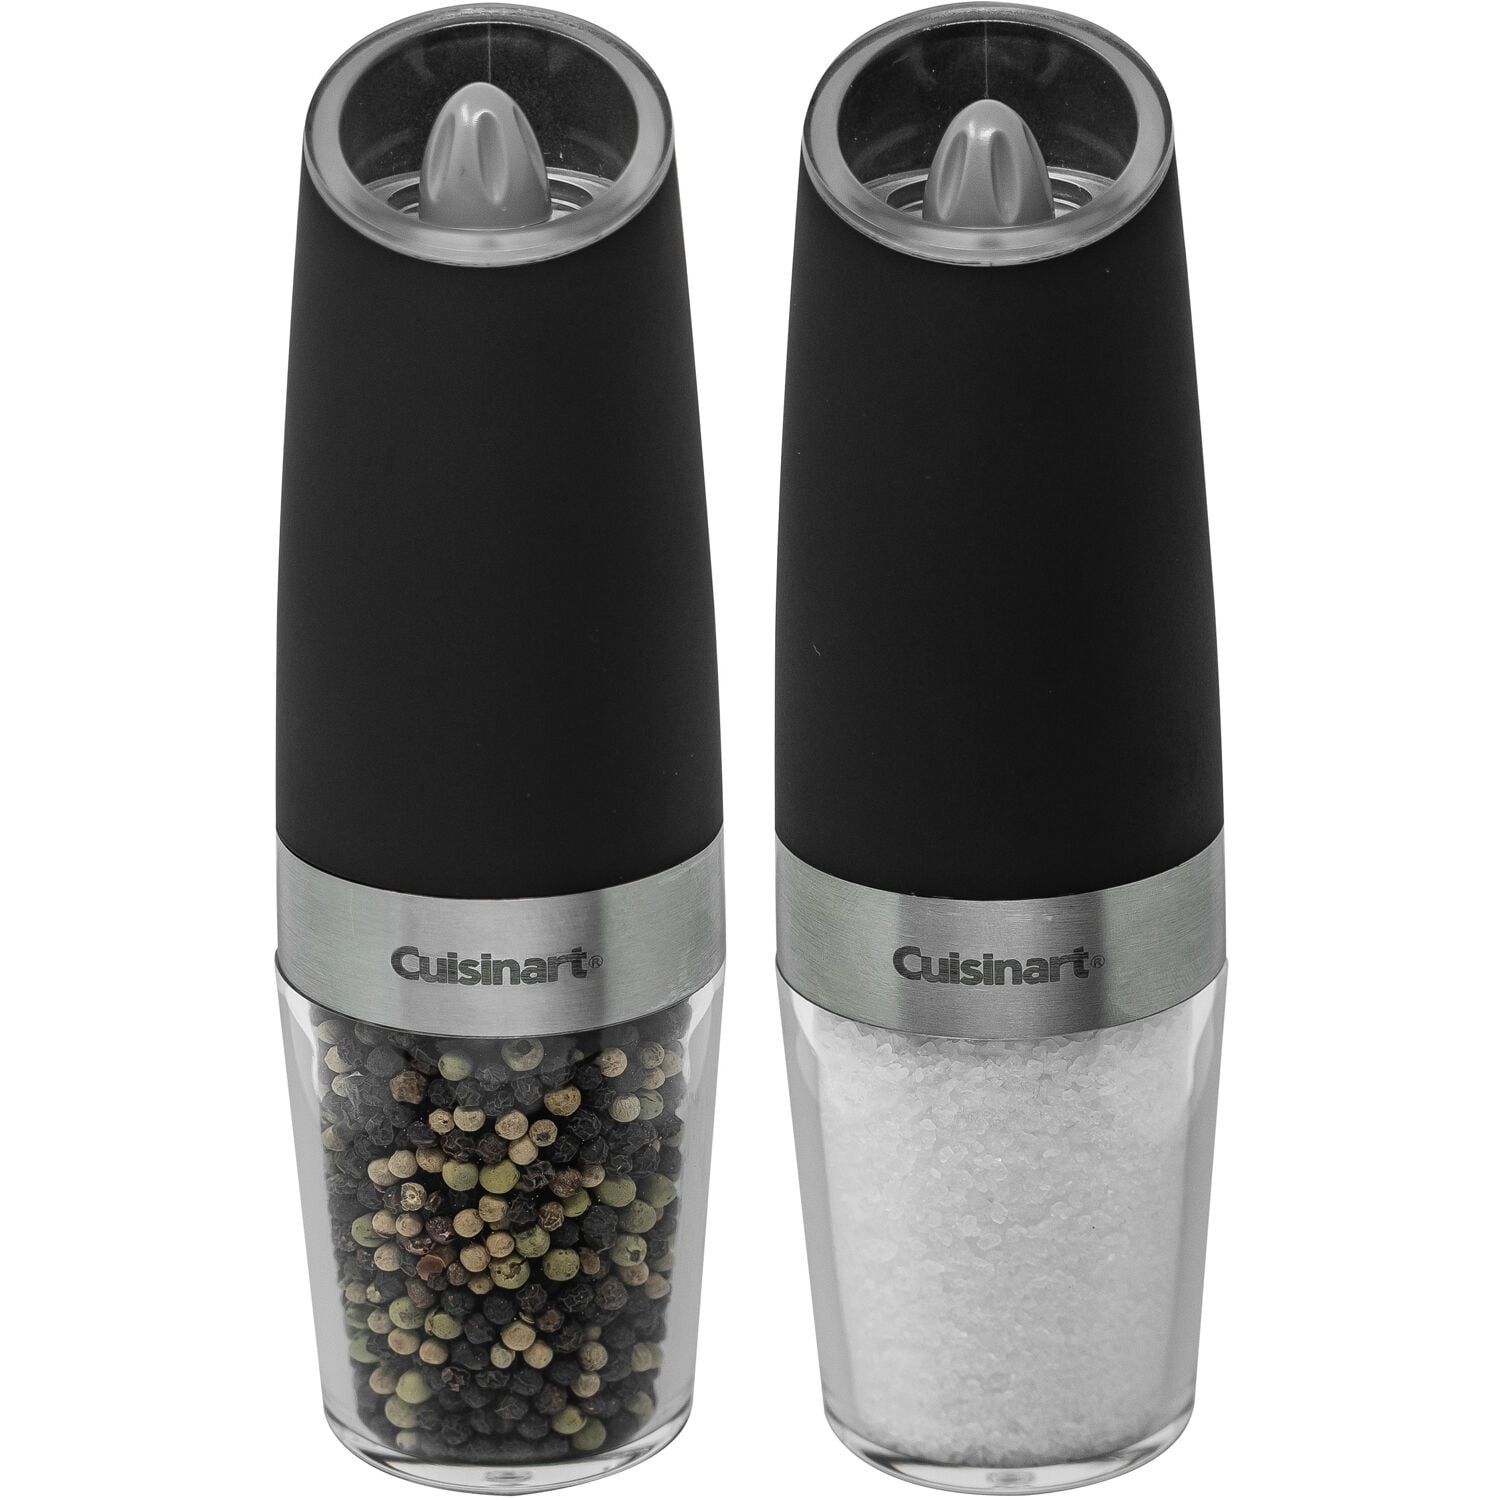 Cuisinart Gravity Salt and Pepper Spice Mill with Blue LED Light